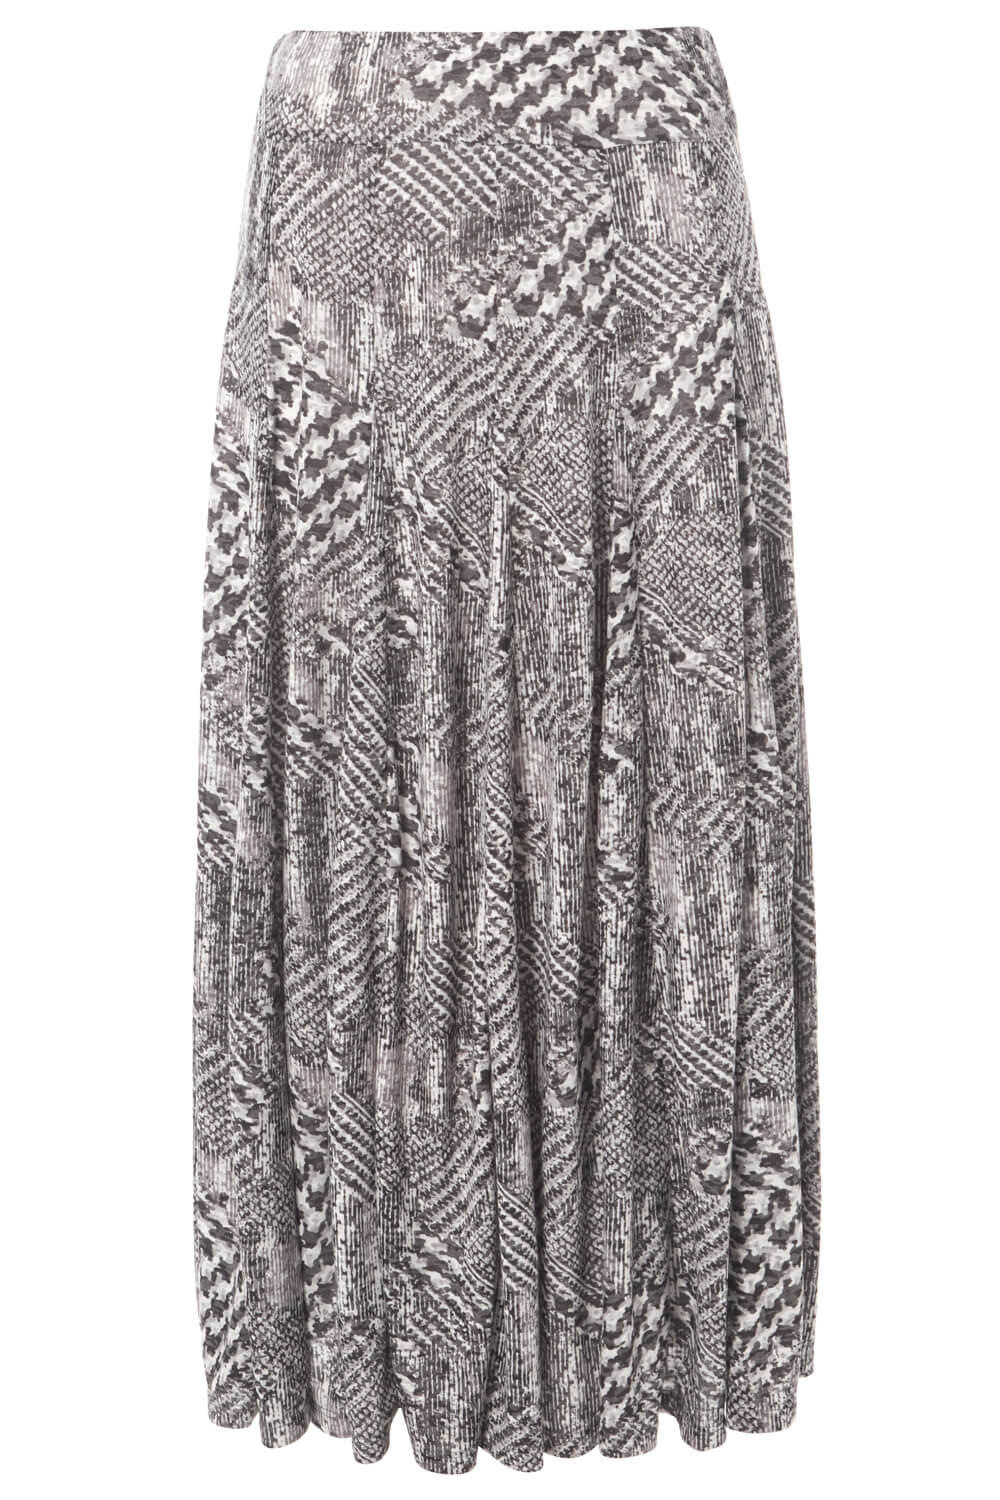 Black Abstract Dogtooth Burnout Skirt, Image 5 of 5